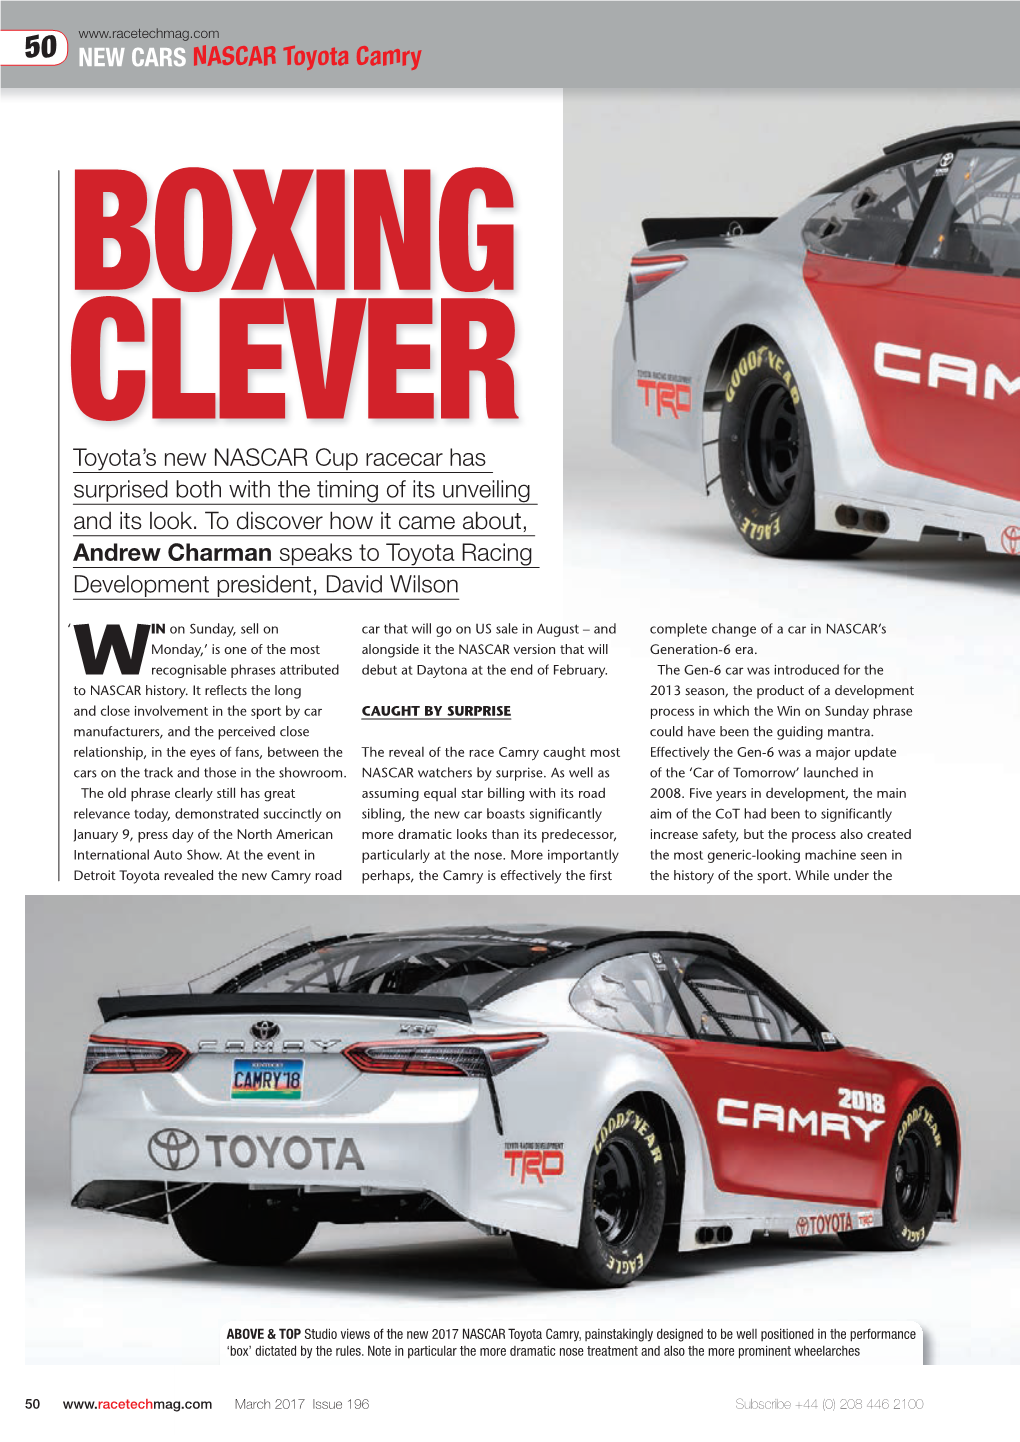 NEW CARS NASCAR Toyota Camry BOXING CLEVER Toyota’S New NASCAR Cup Racecar Has Surprised Both with the Timing of Its Unveiling and Its Look